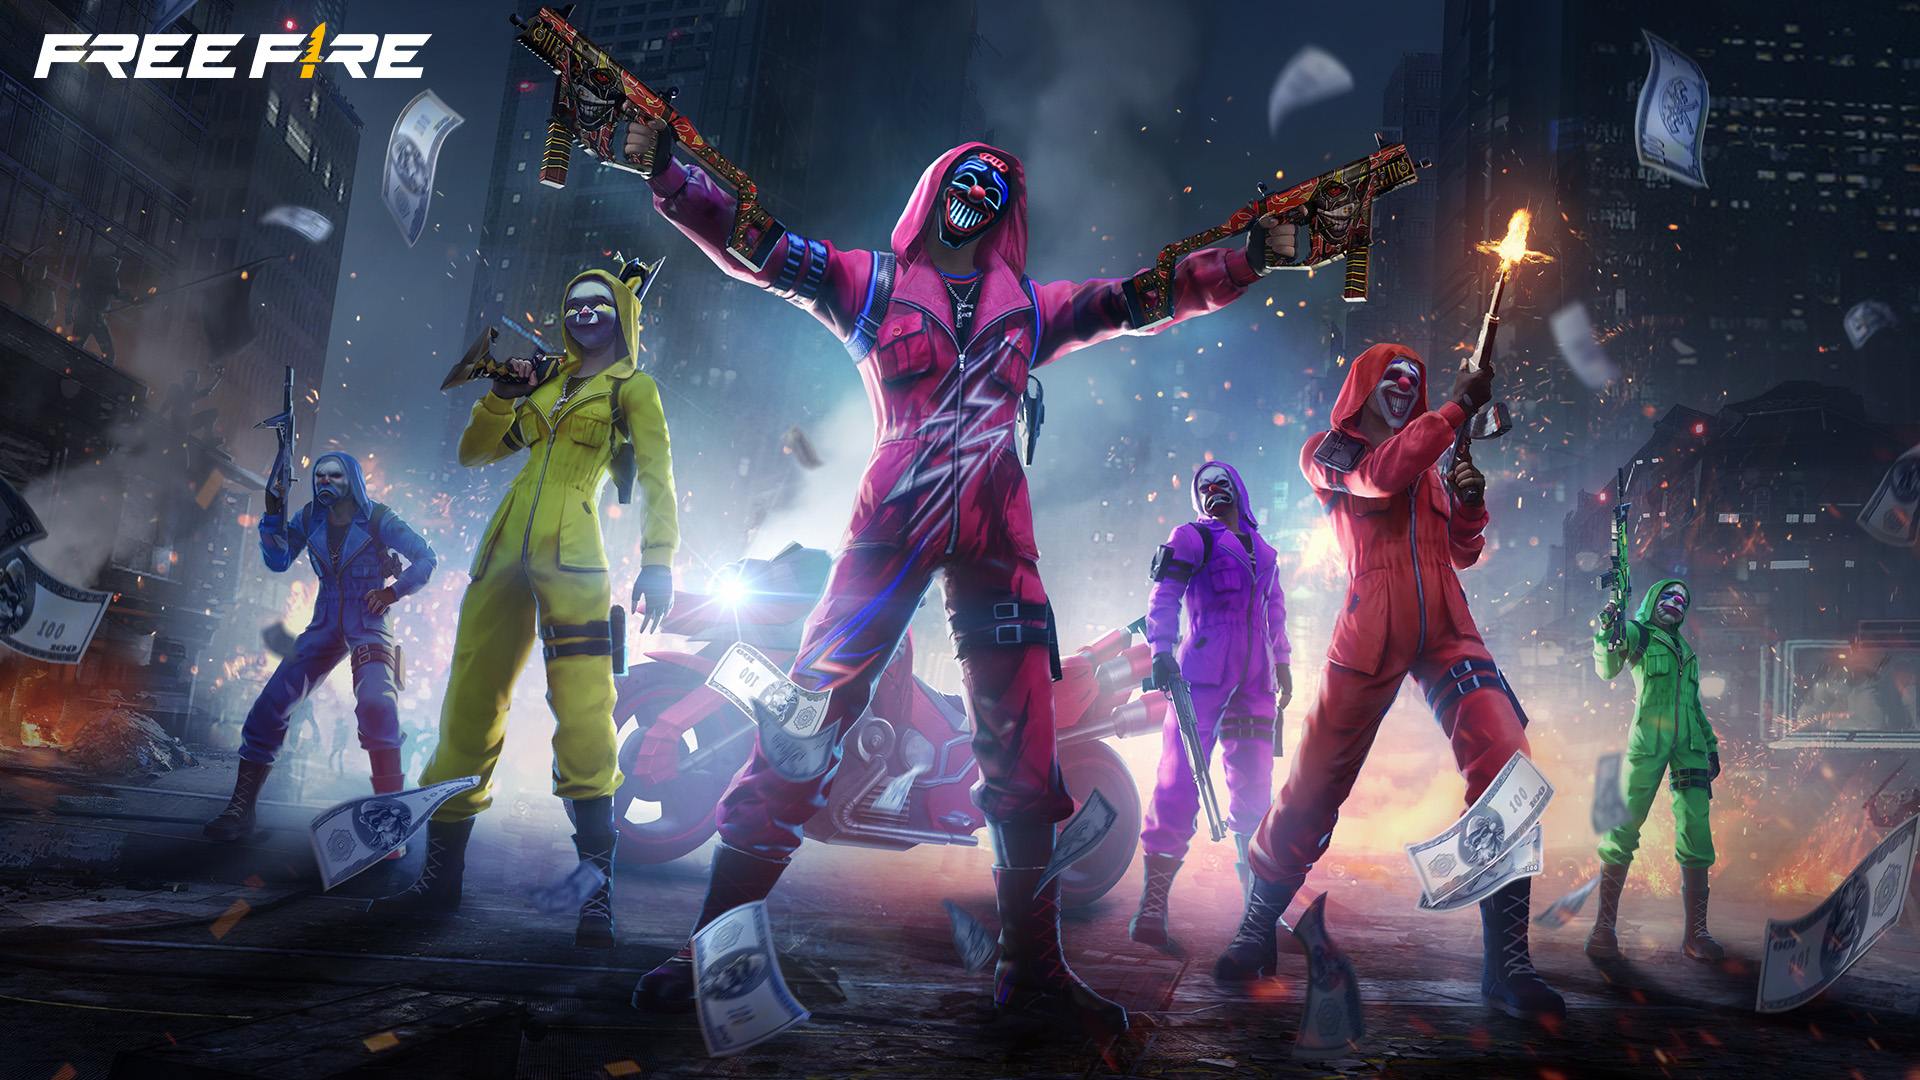 How to get Free Fire MAX diamonds for free in October 2022